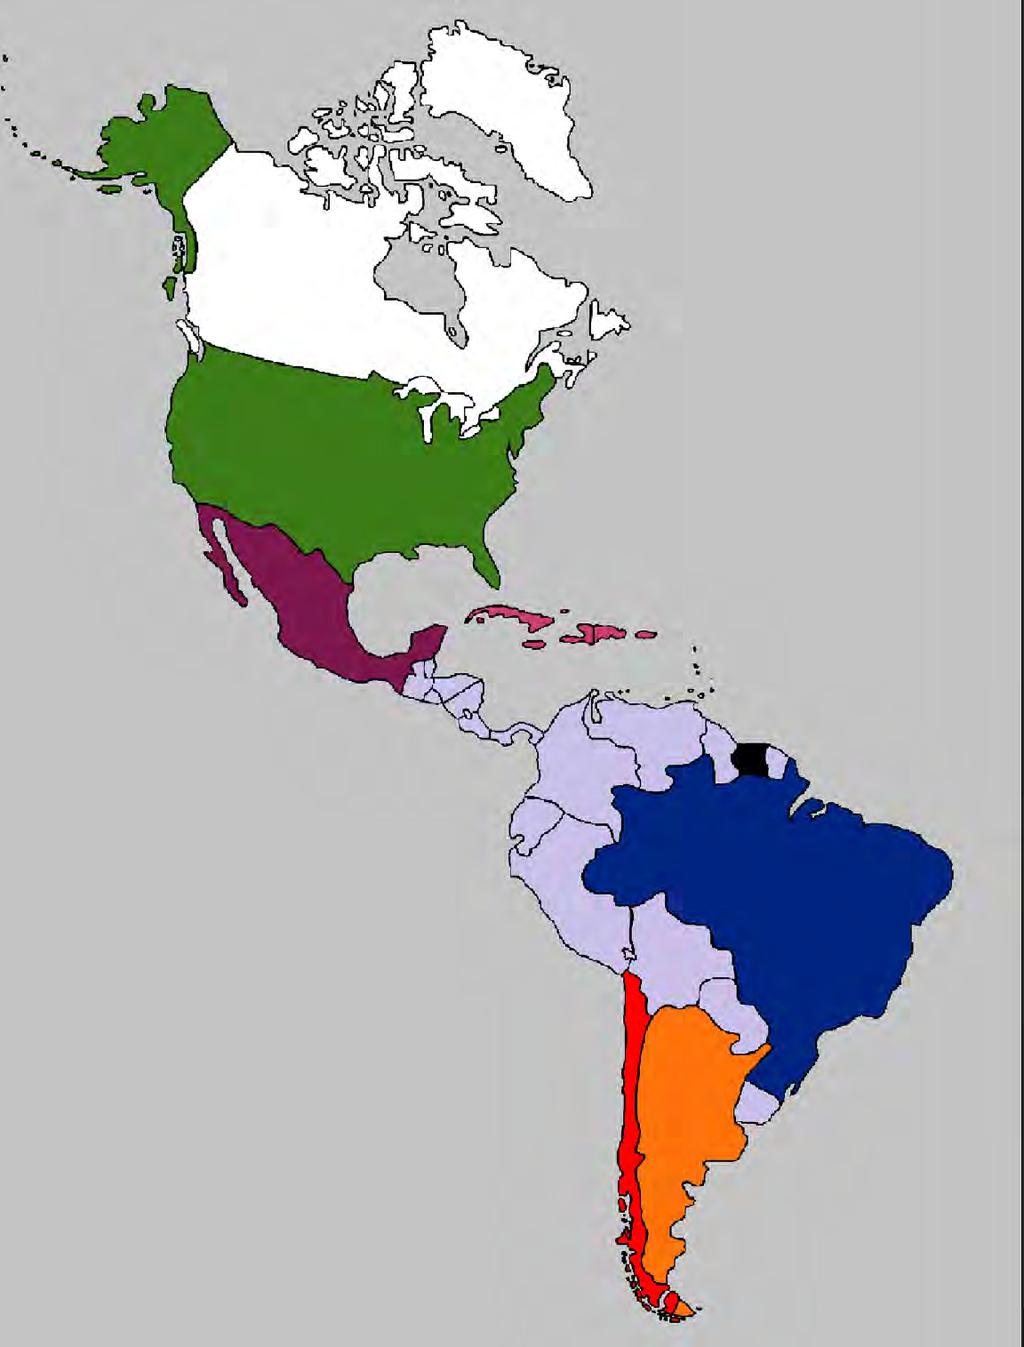 Red Knot 2 Sanderling Mexico (Purple) 1 Ruddy Turnstone Chile (Red) 11 Red Knot Argentina